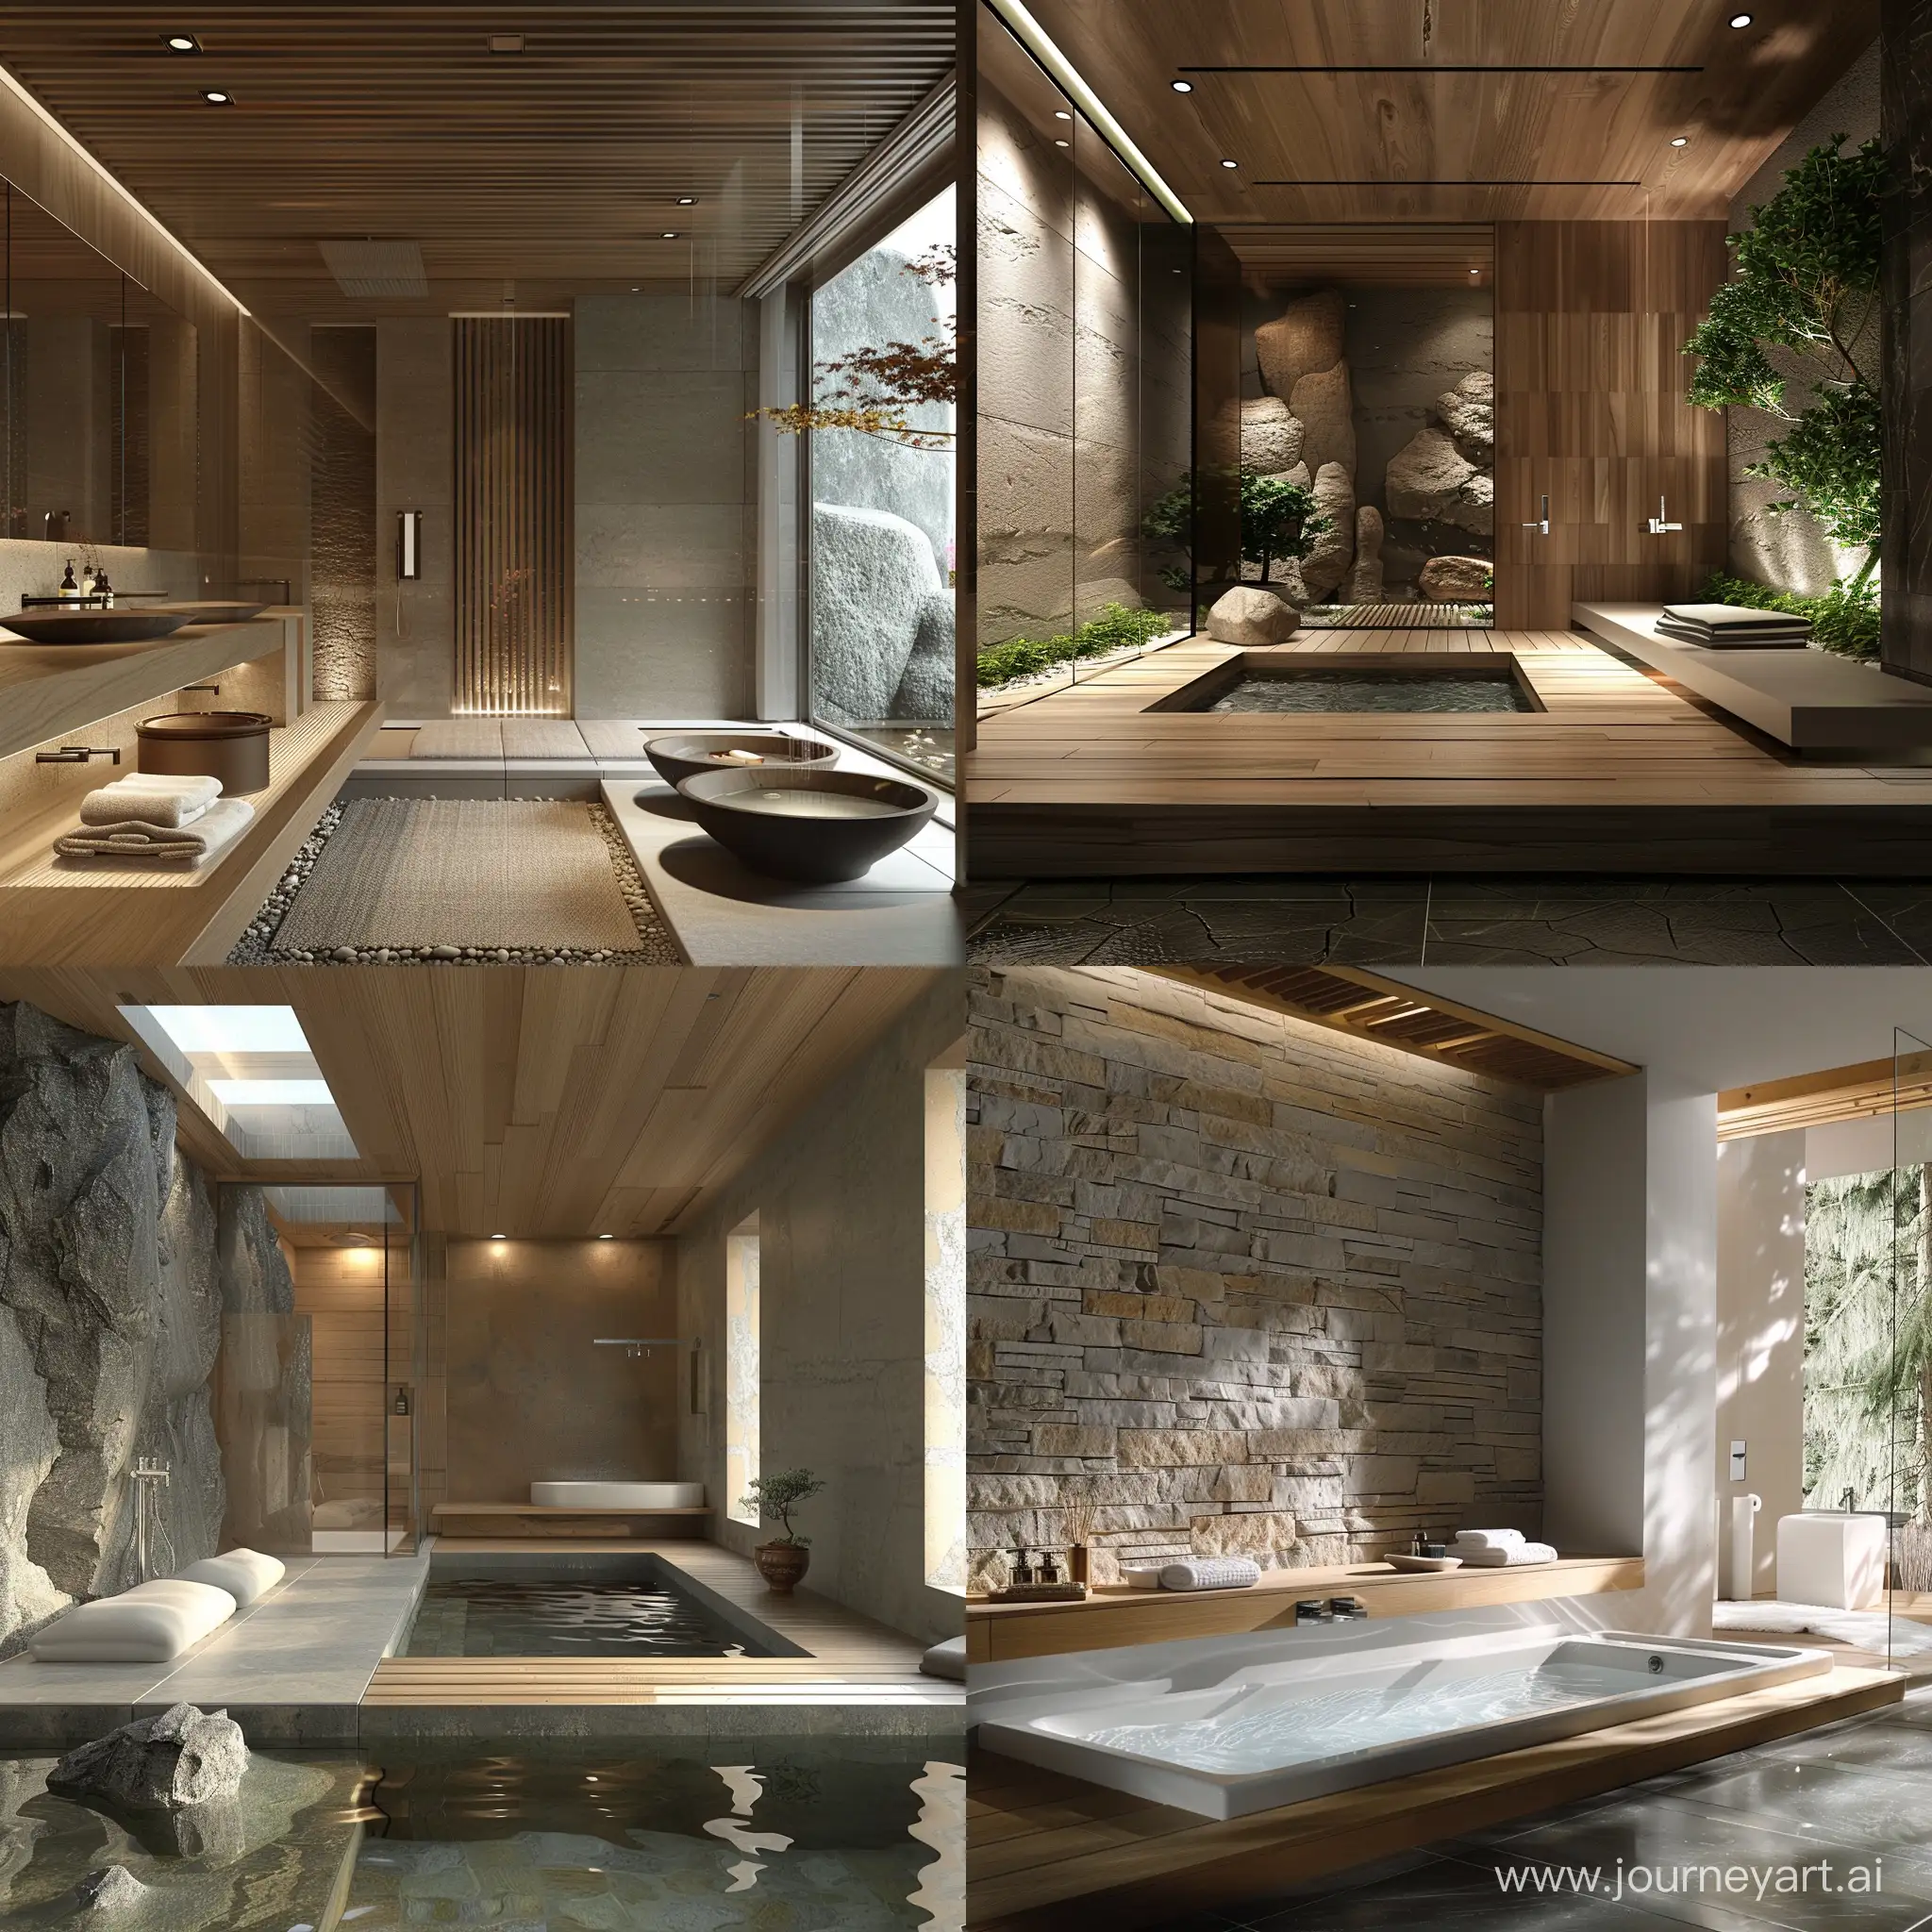 Interior design, a serene contemporary Zen bathroom with minimalist fixtures, natural wood elements, stone accents, and a tranquil atmosphere for video --v 6 --ar 1:1 --no 19323